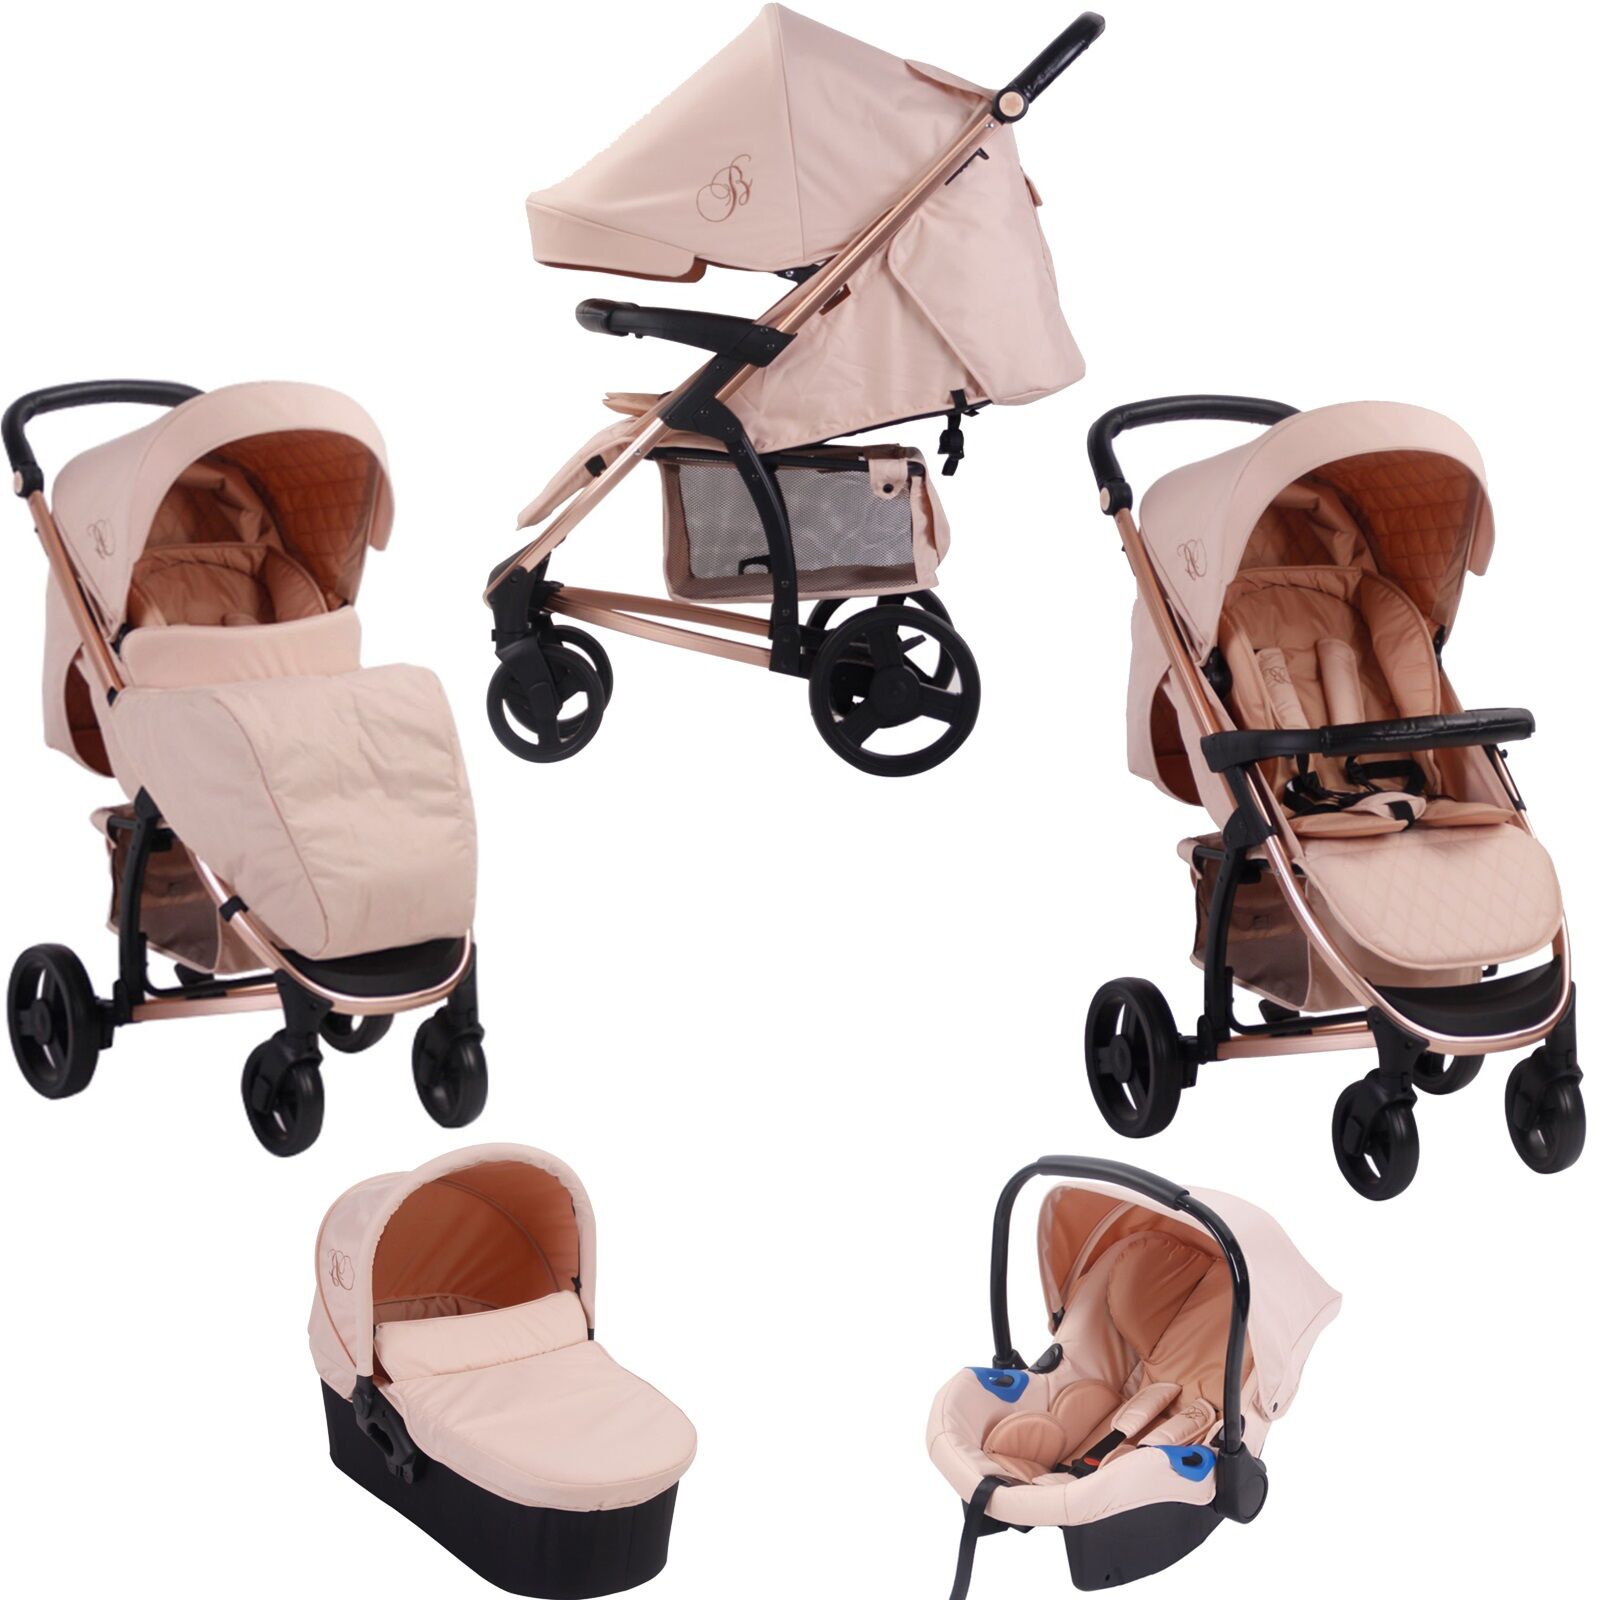 My Babiie MB200+ *Billie Faiers Collection* Travel System & Carrycot - Rose Gold & Blush